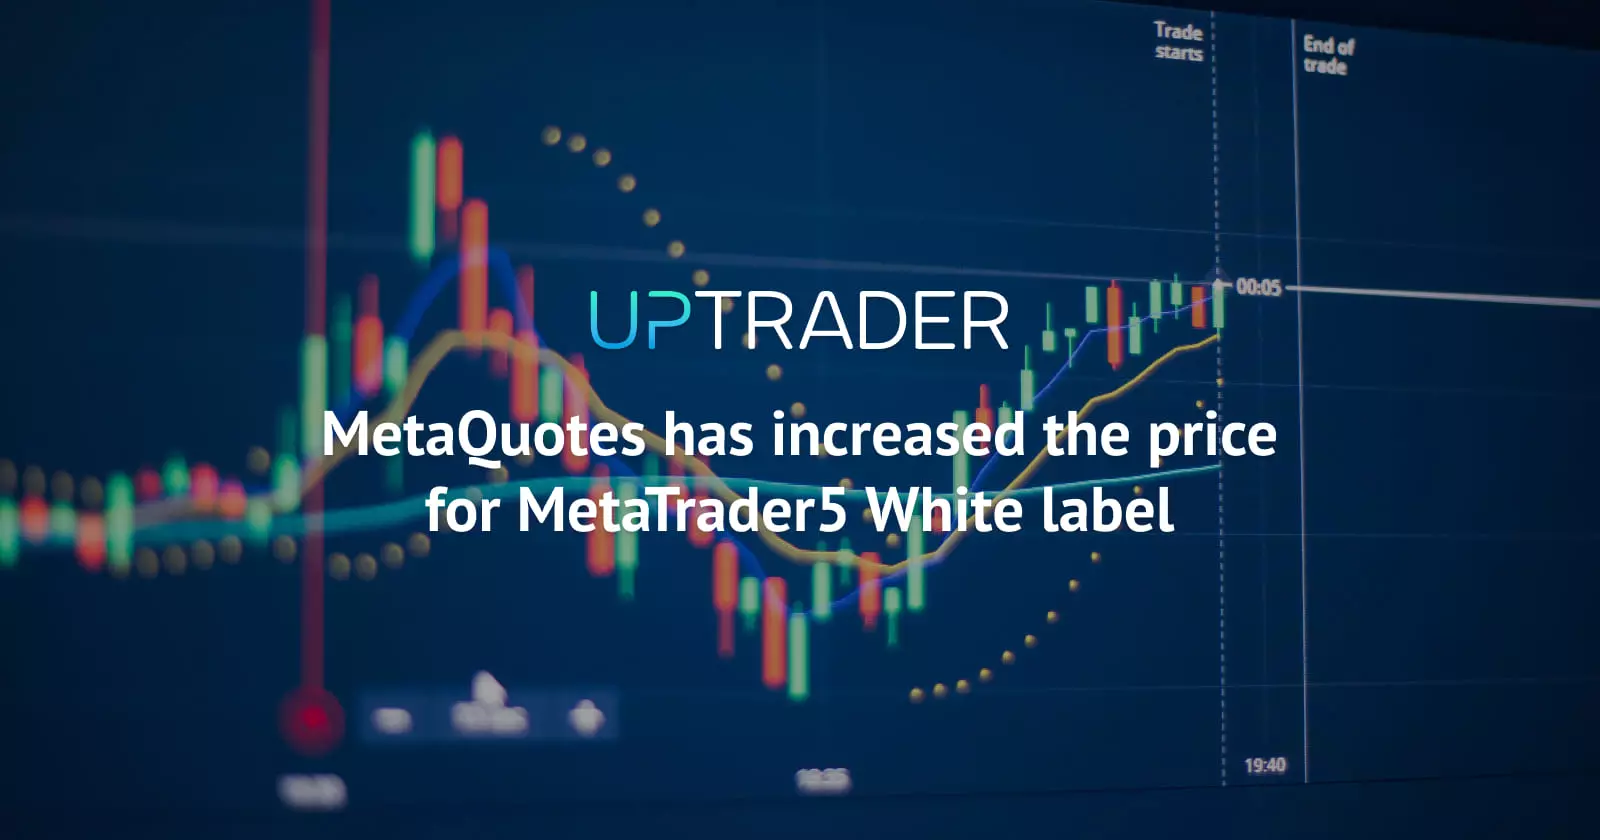 MetaQuotes has increased the price for MetaTrader 5 White label